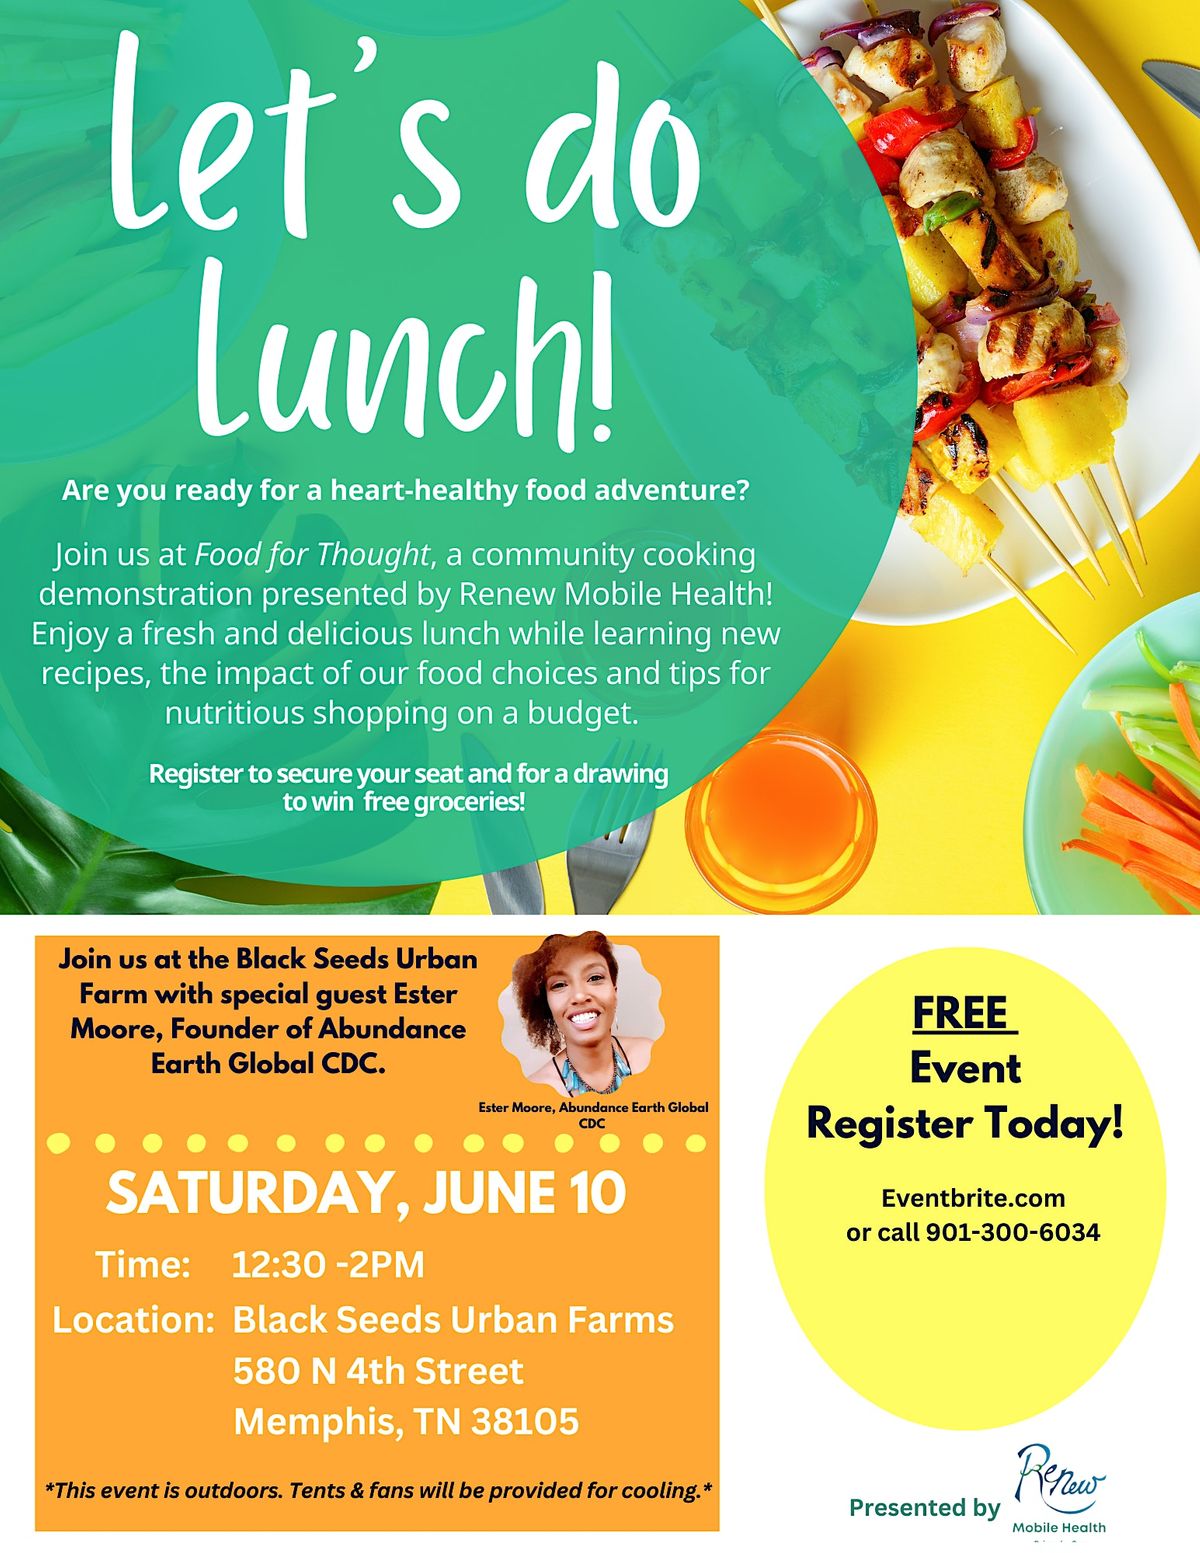 Food for Thought: Heart-Healthy Community Cooking Series